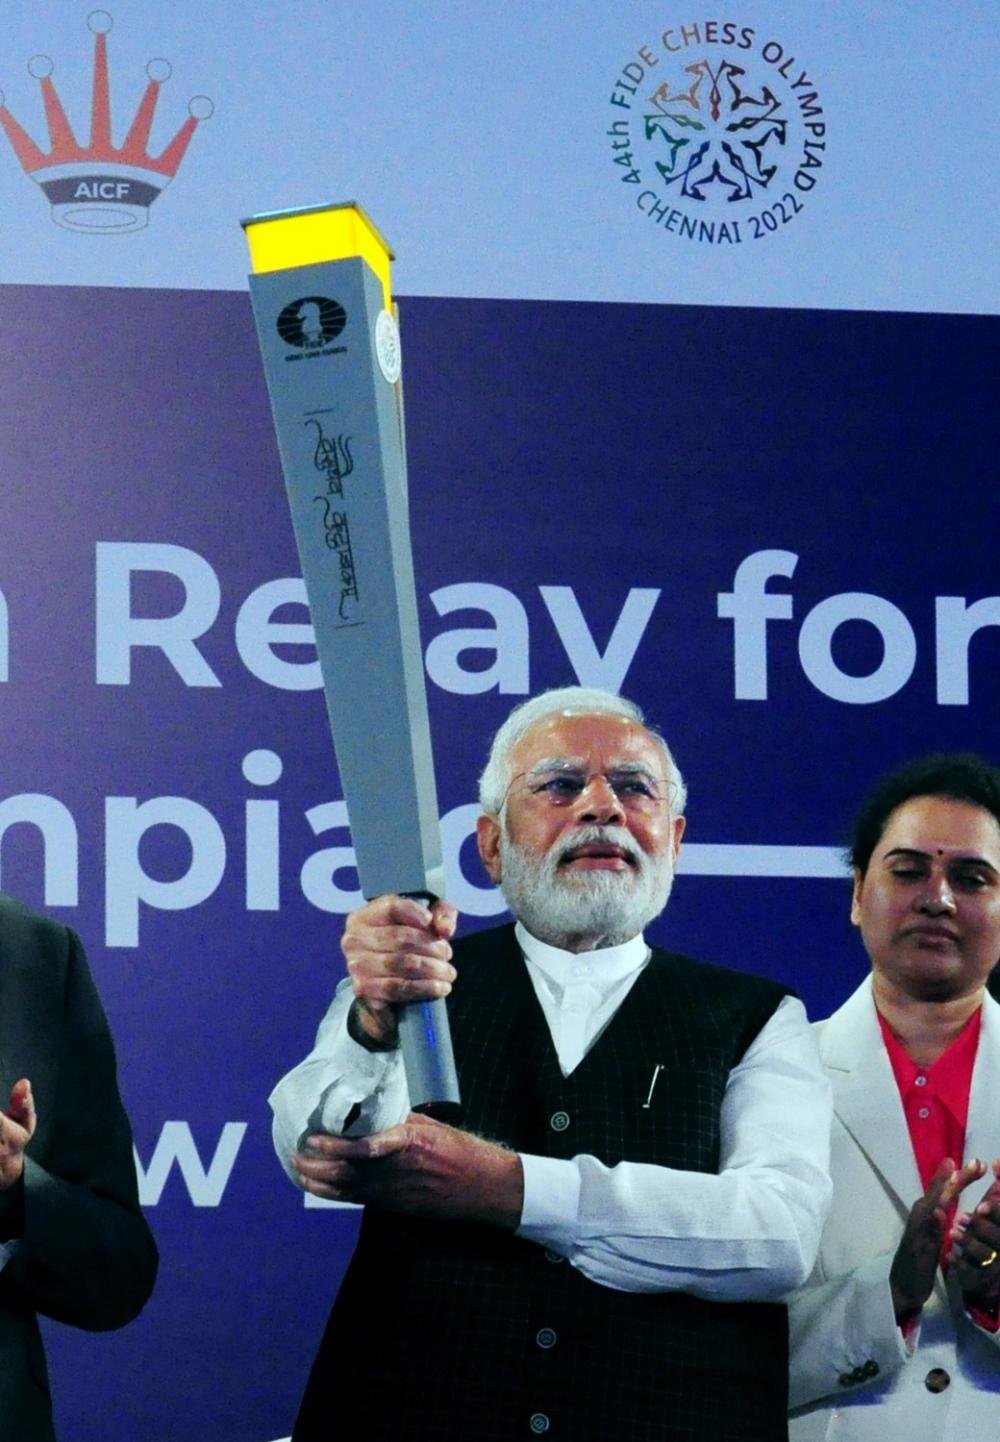 The Weekend Leader - In 75th year of Independence, Chess Olympiad has come to its home country: Modi